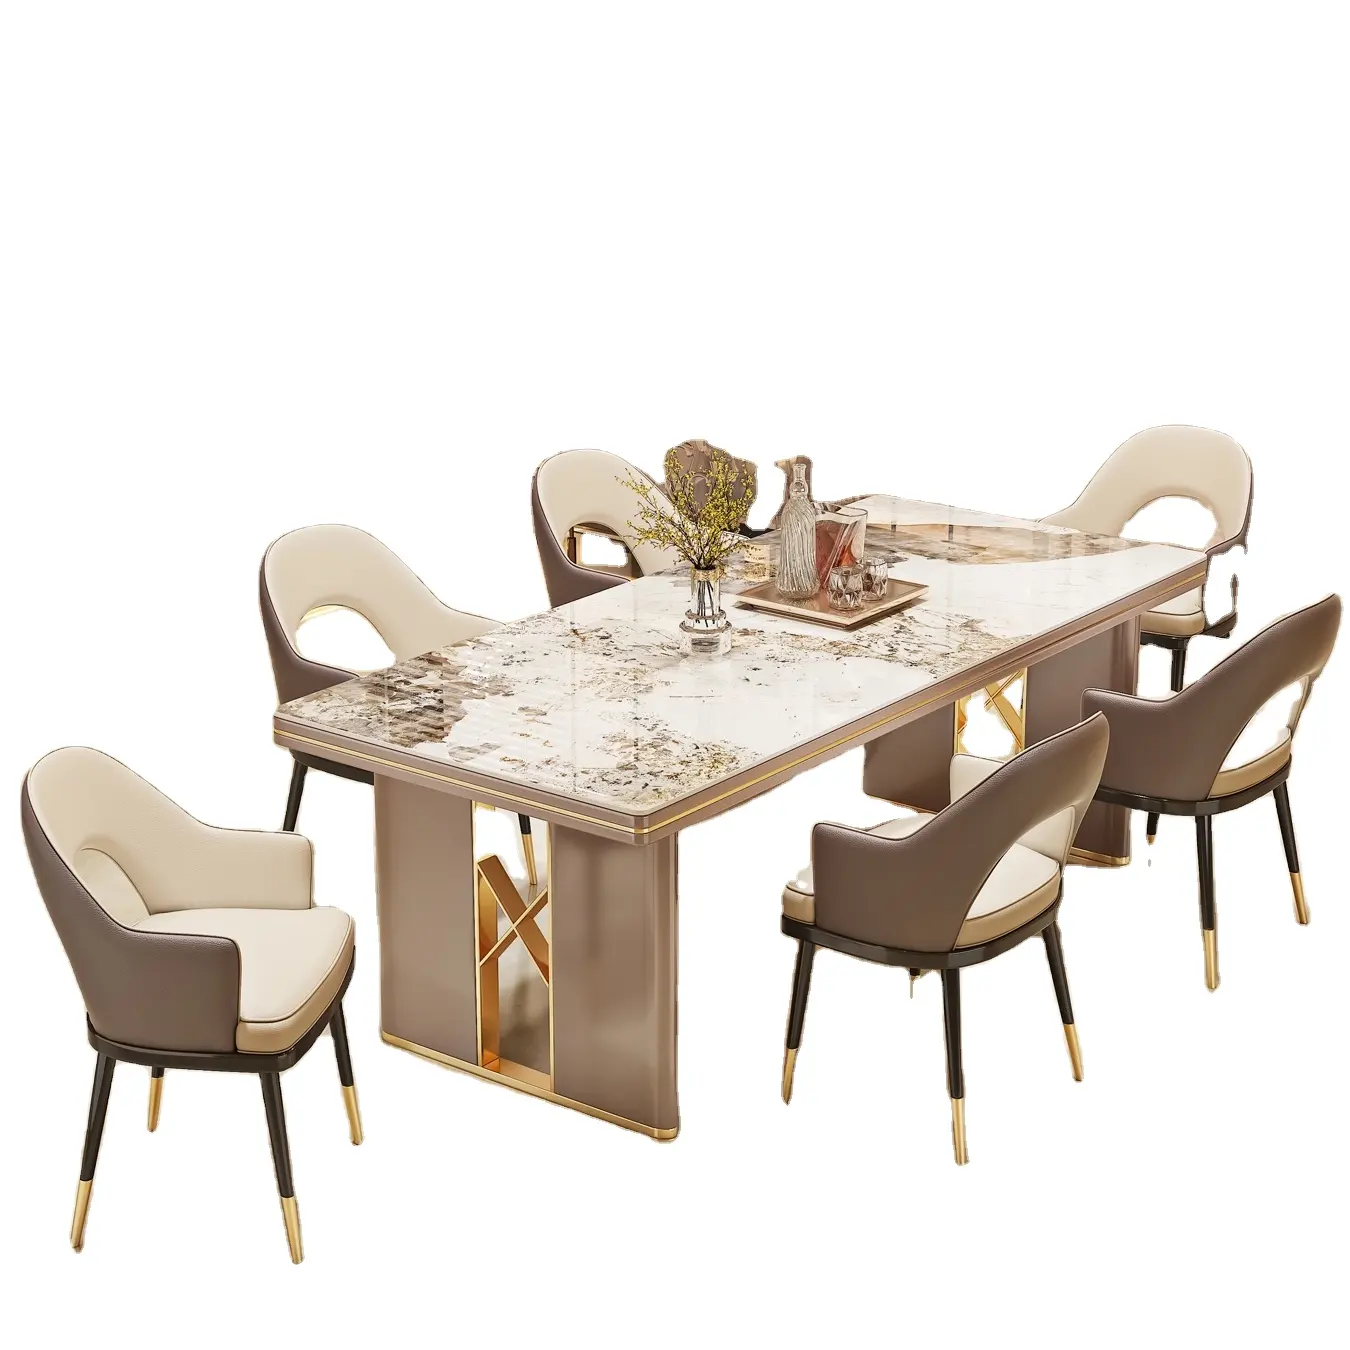 Italian style high quality marble dining table chairs set living room table set furniture